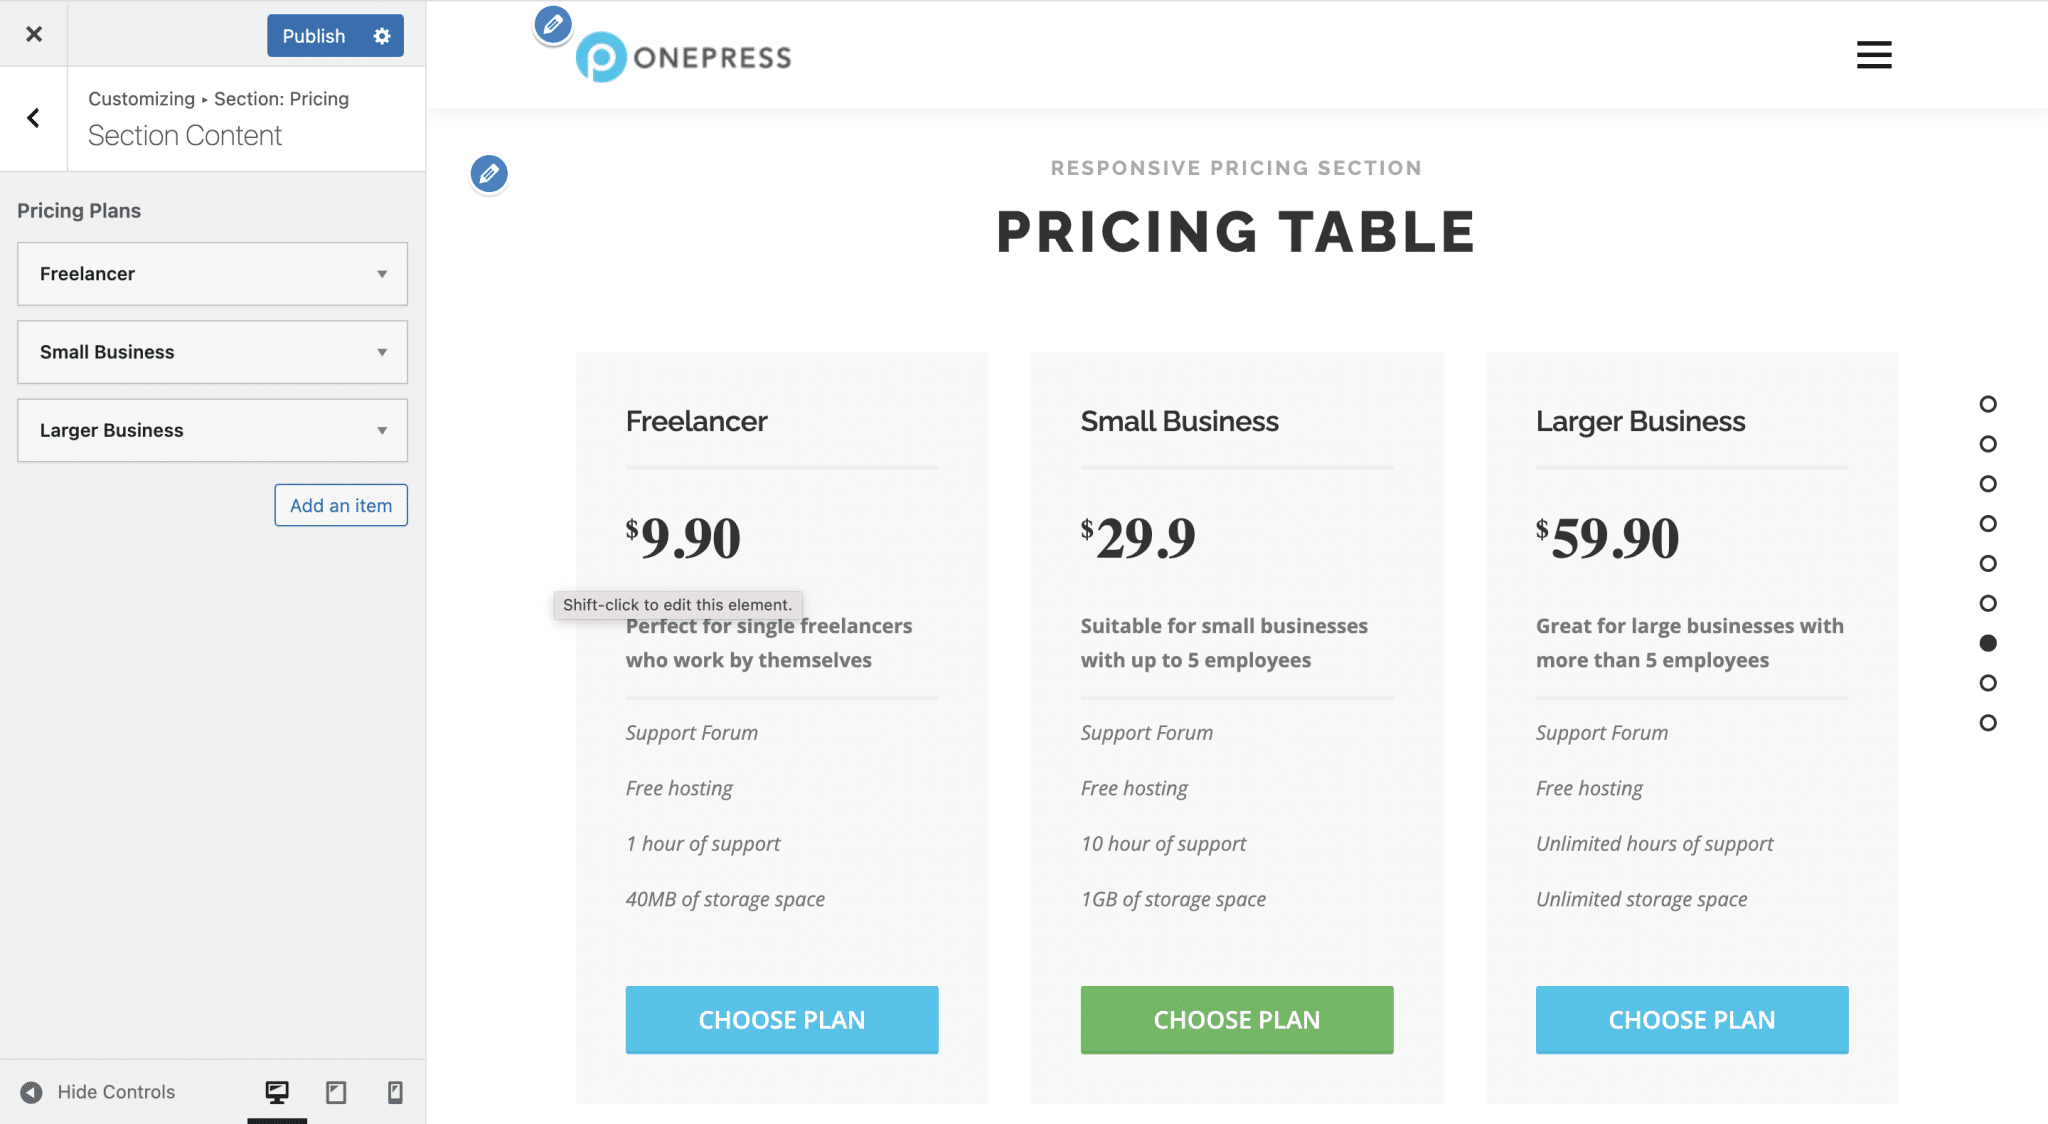 "Pricing" section settings of a WordPress OnePress site.